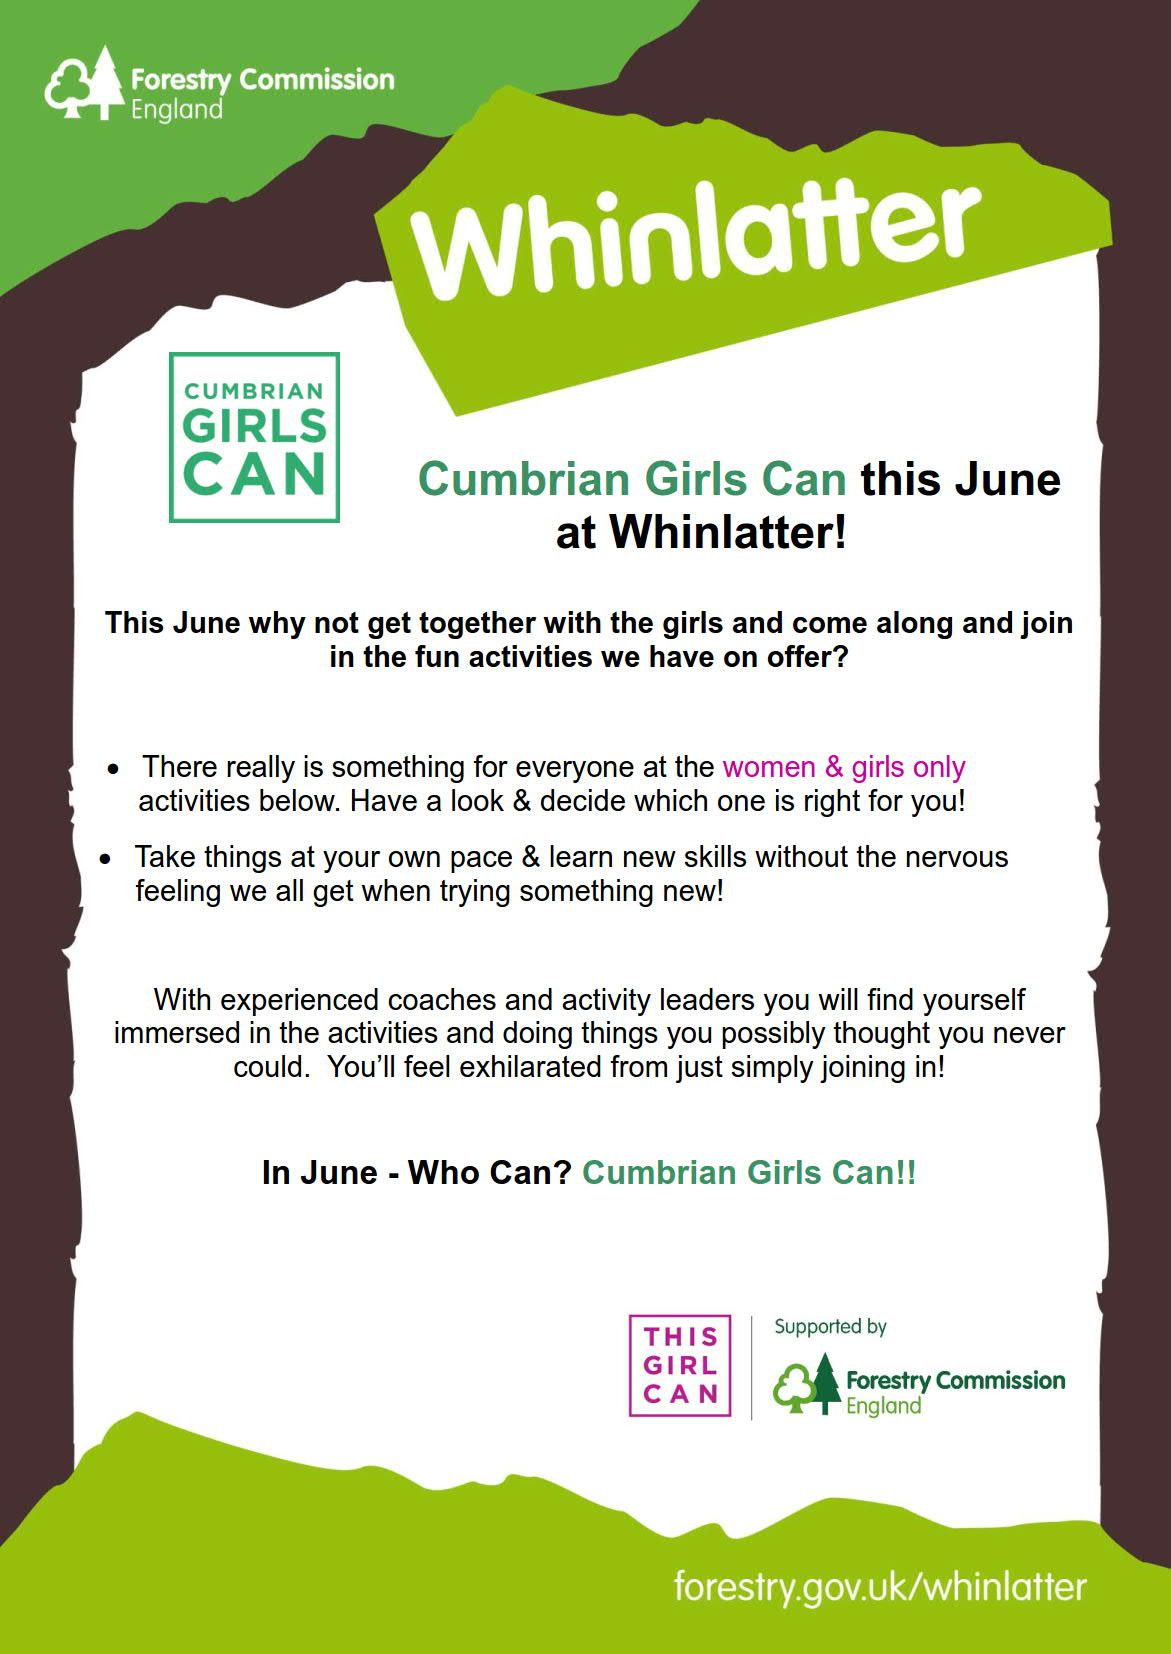 Cumbrian Girls Can at Whinlatter!